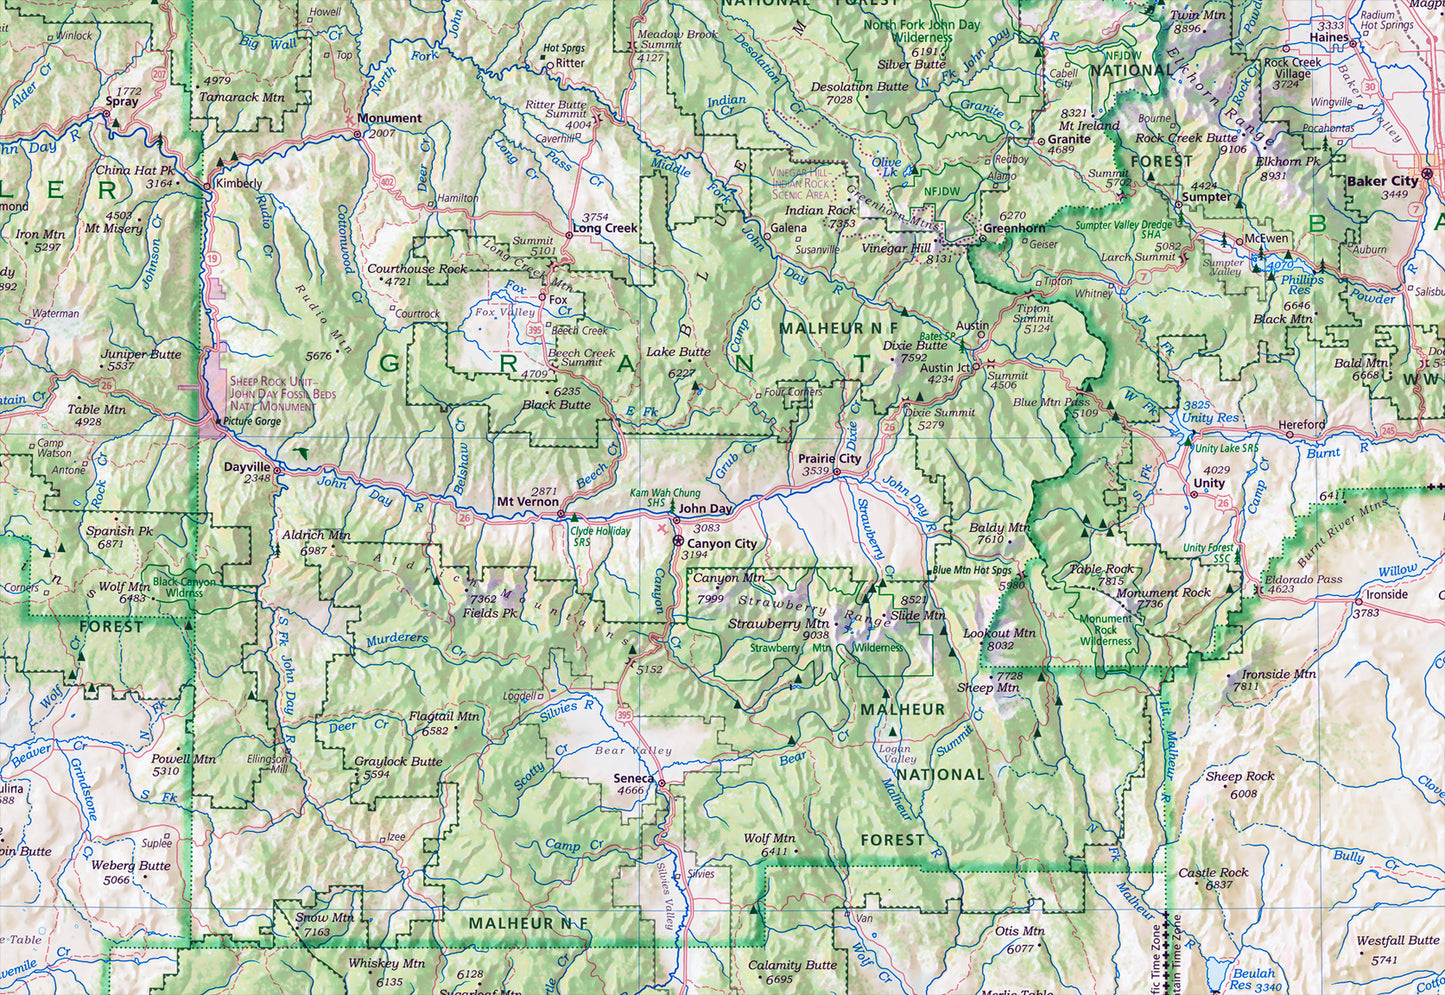 The Essential Geography of Oregon, Edition 1, Version 2.1